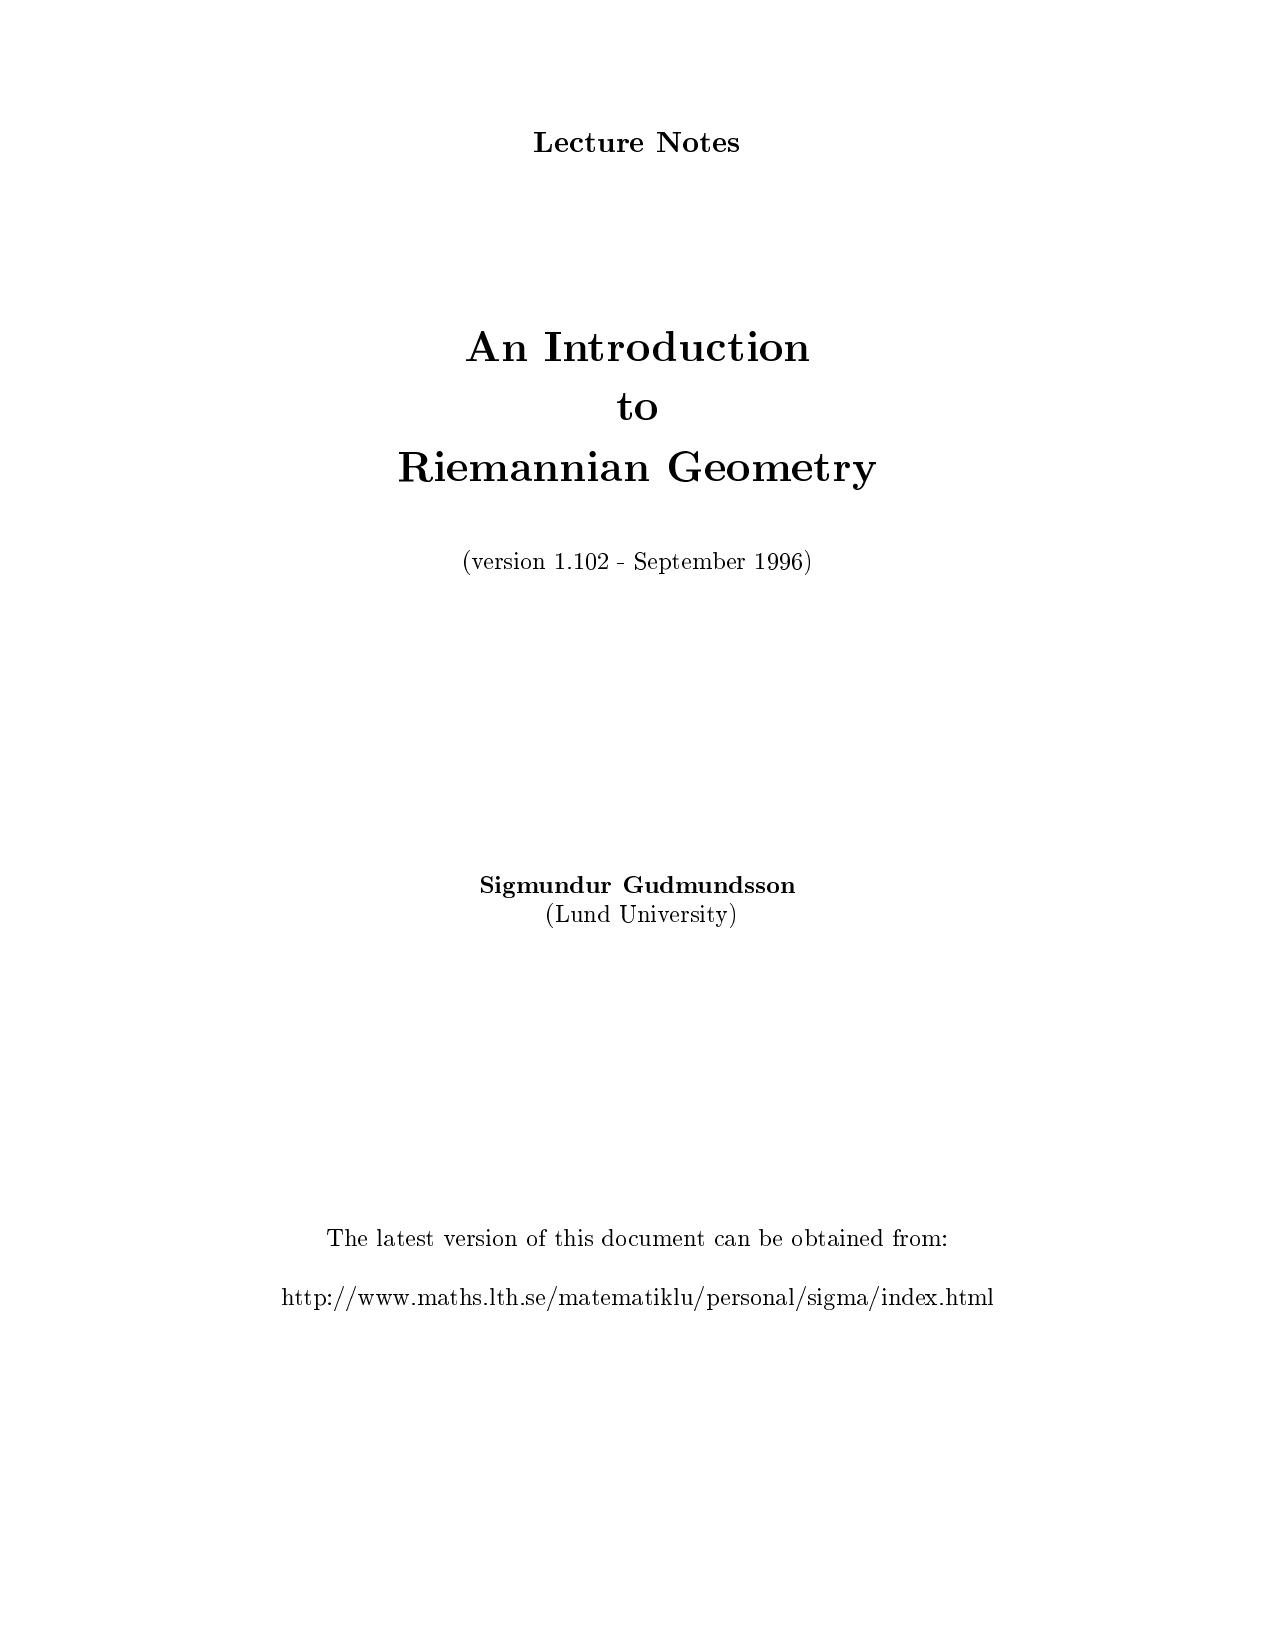 An Introduction to Riemannian Geometry - Lecture Notes